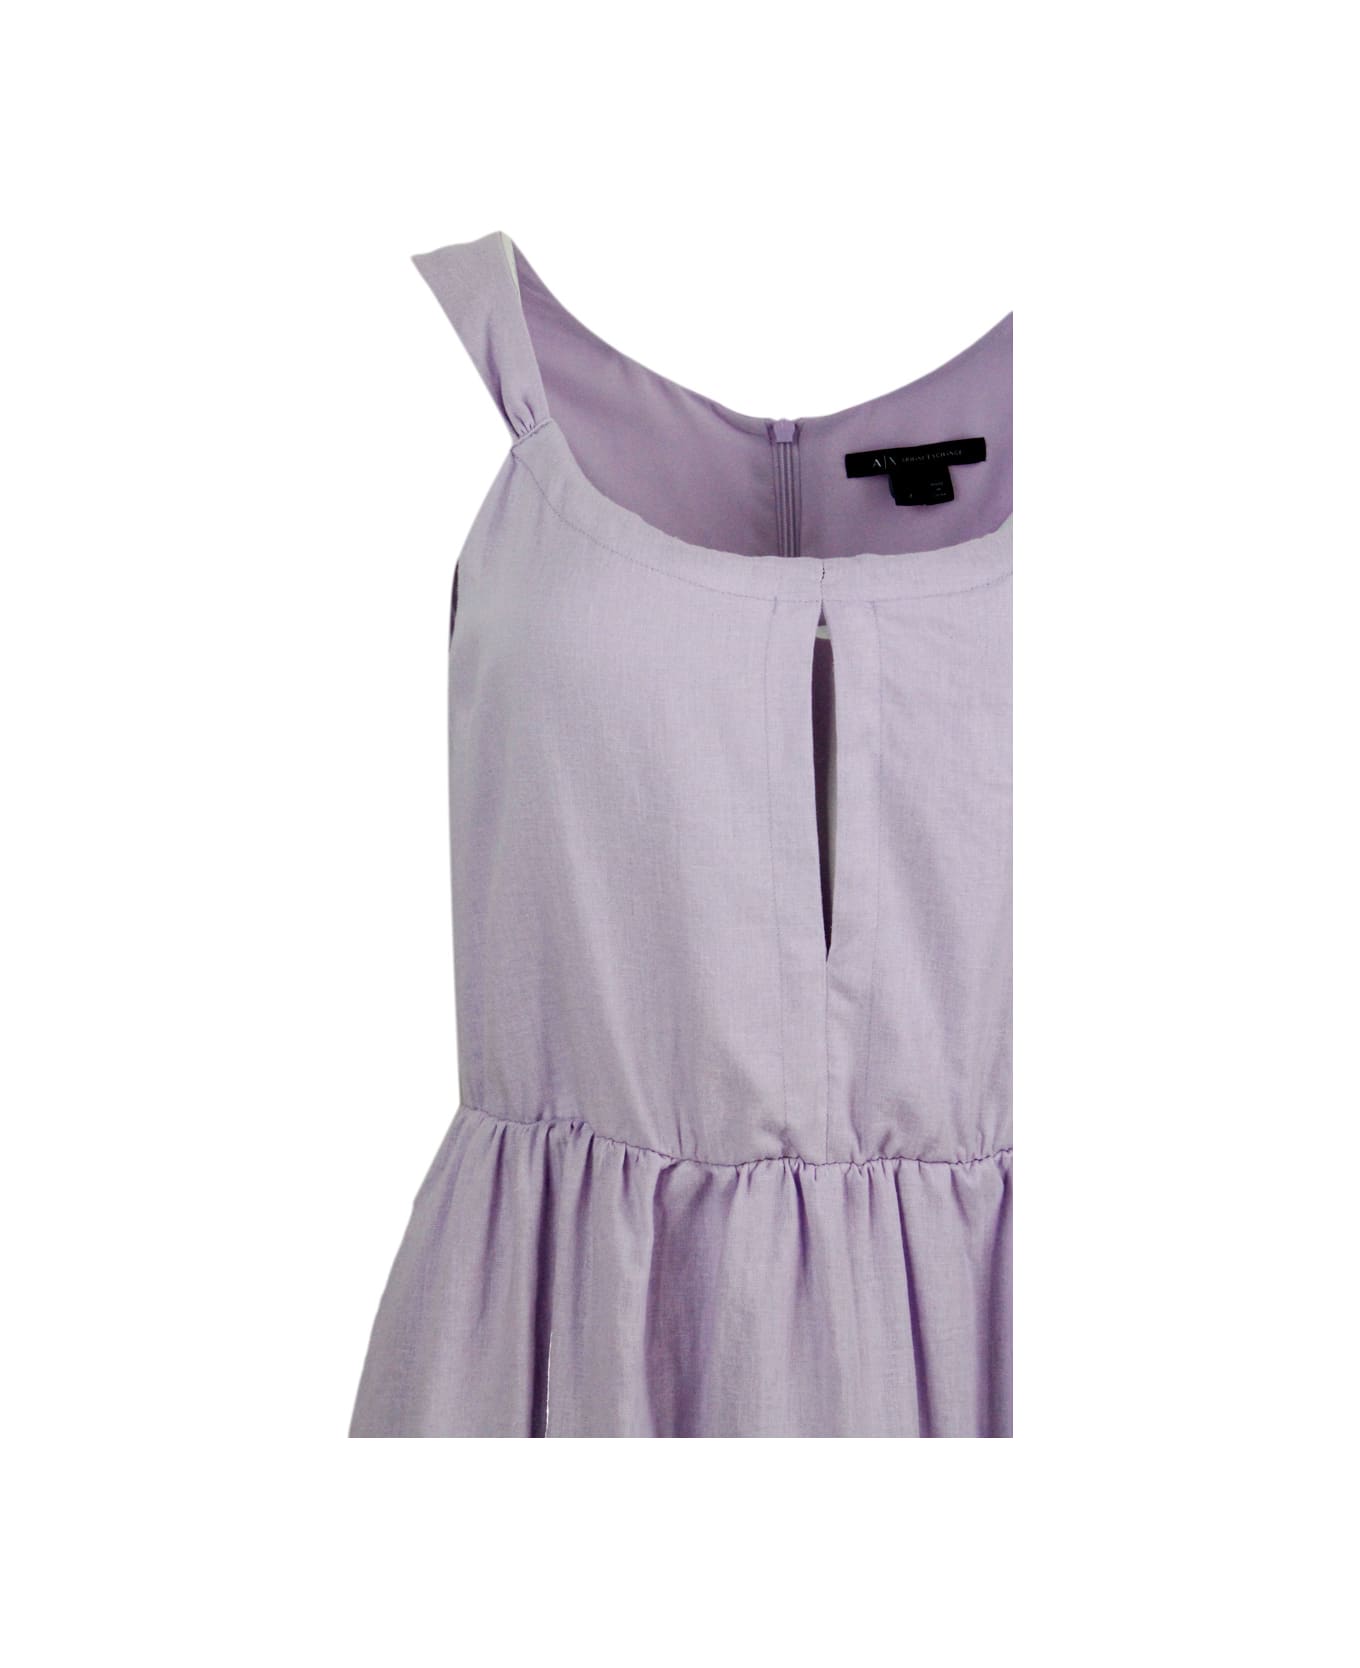 Armani Collezioni Sleeveless GARNITUR Made Of Linen Blend With Elastic Gathering At The Waist. Welt Pockets - Pink